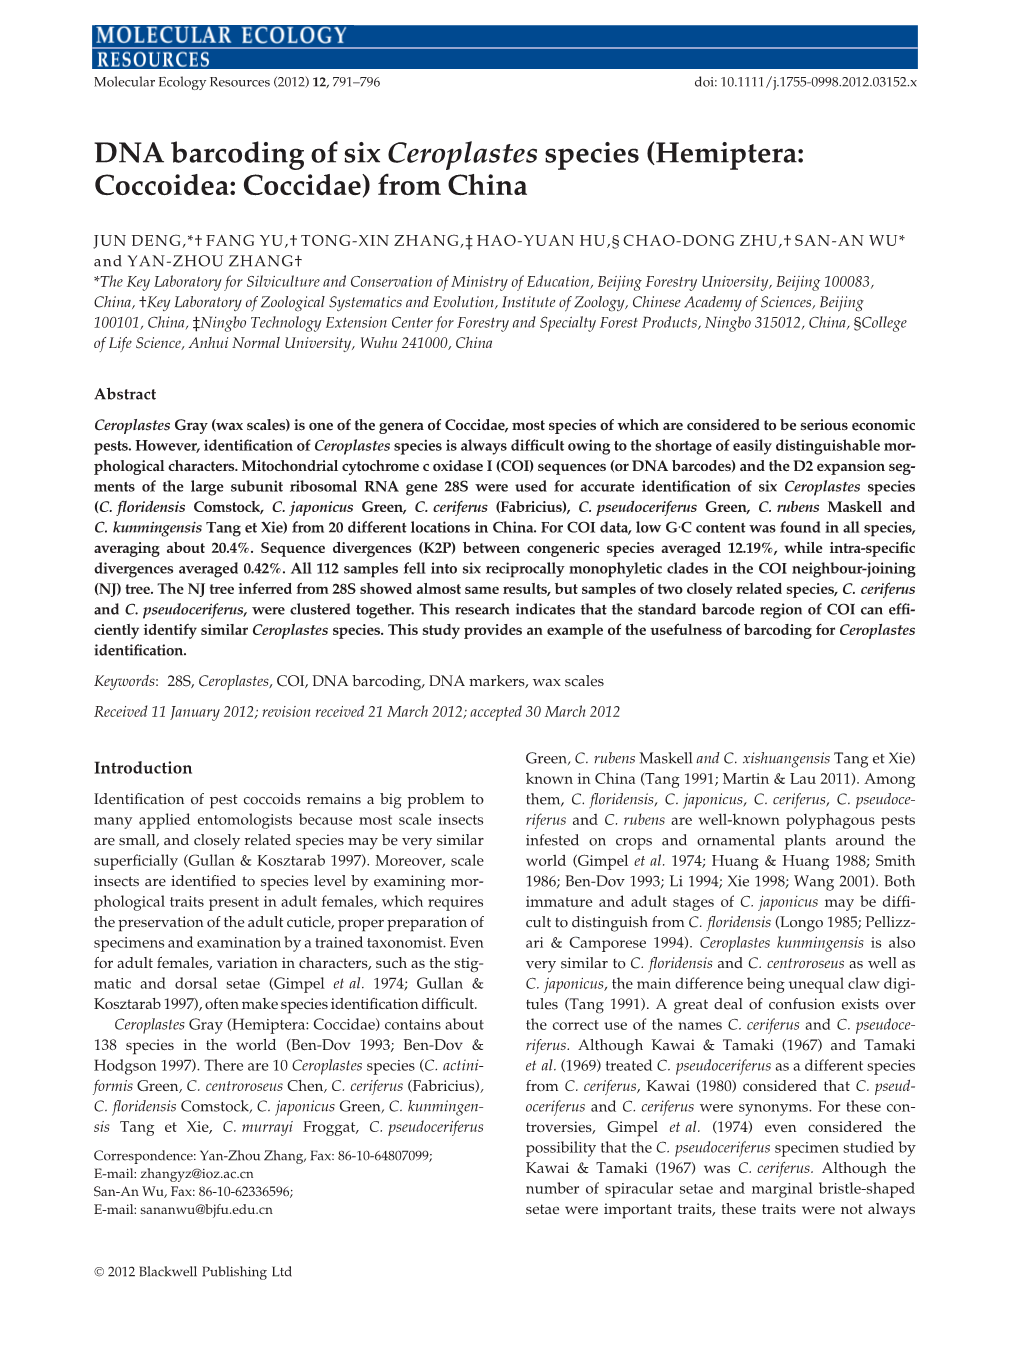 DNA Barcoding of Six Ceroplastes Species (Hemiptera: Coccoidea: Coccidae) from China